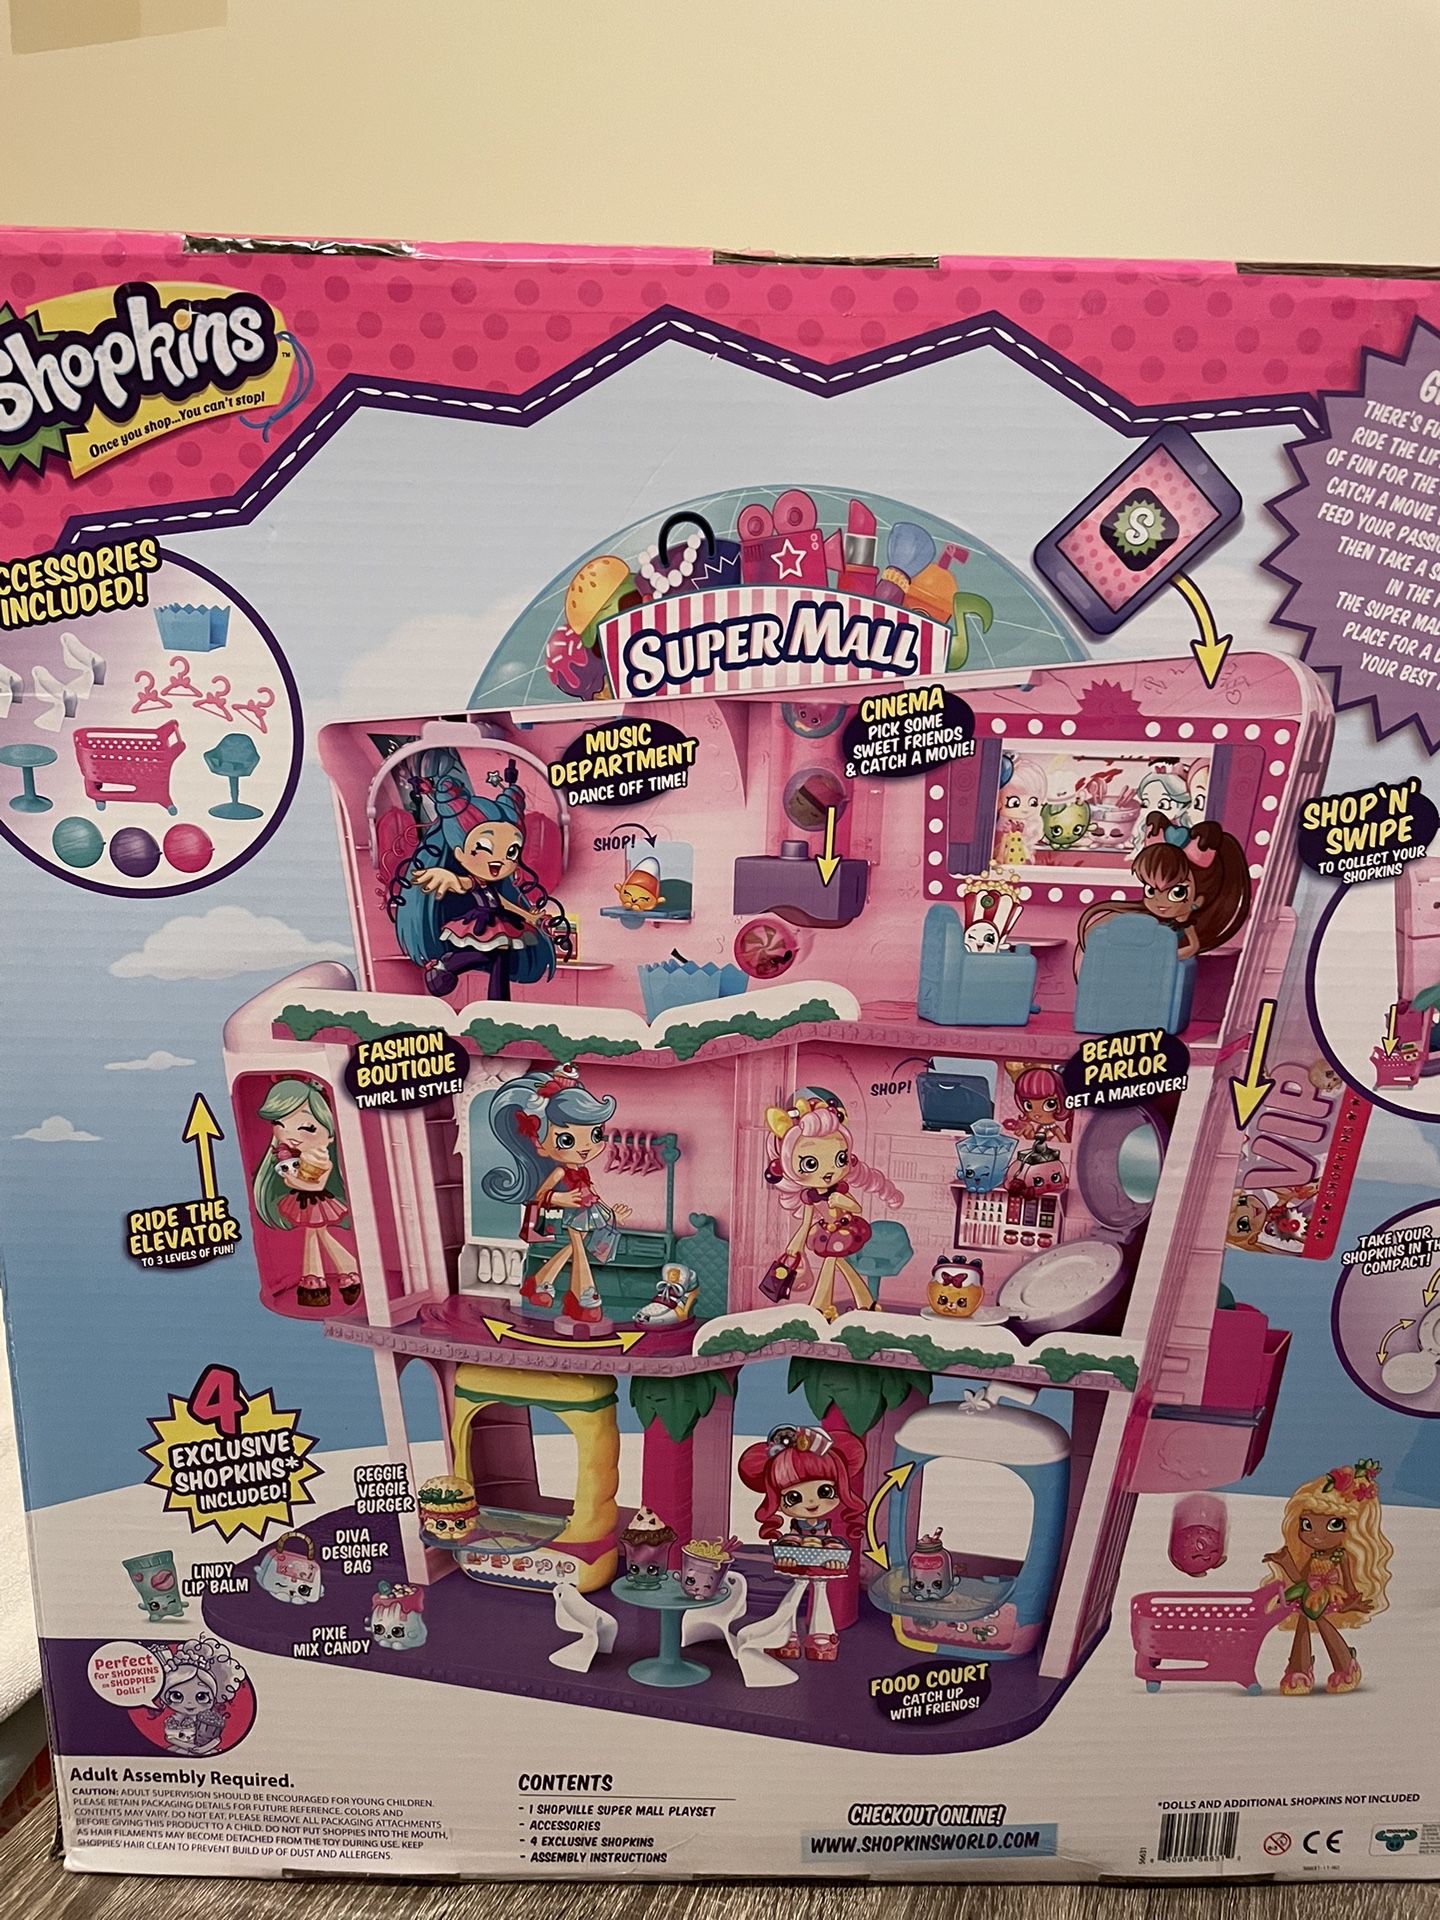 Shopkins Shopville Play set - Brand New -Never Opened